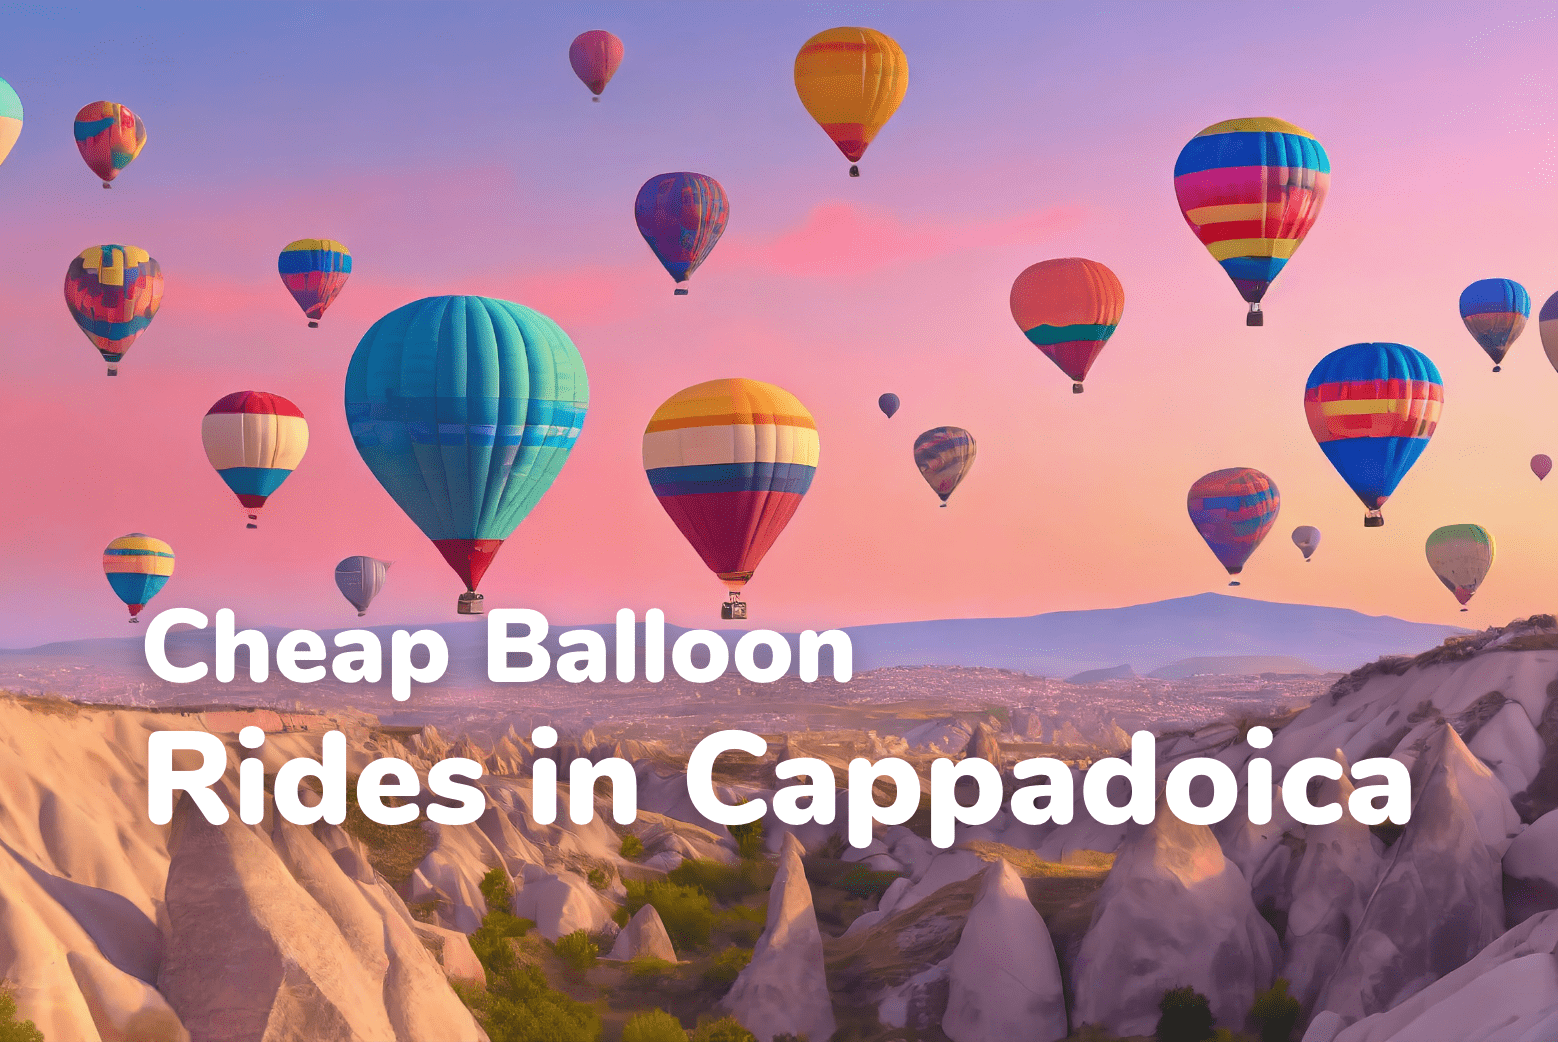 Discover the Best Deals: How to Find the Cheapest Balloon Rides in Cappadocia